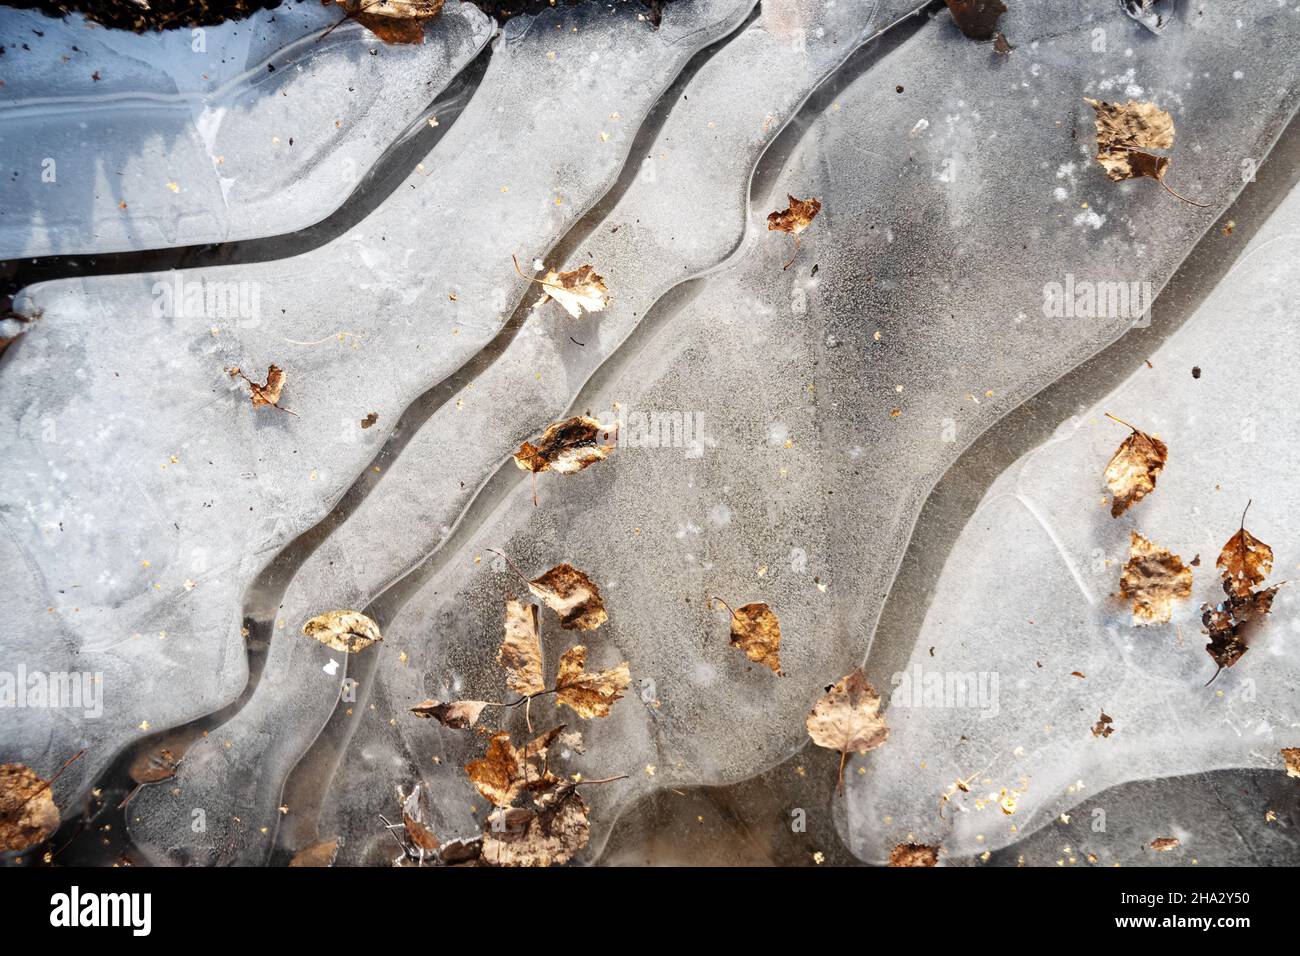 Dry birch leaves and seeds frozen into an icy puddle in late autumn. Stock Photo